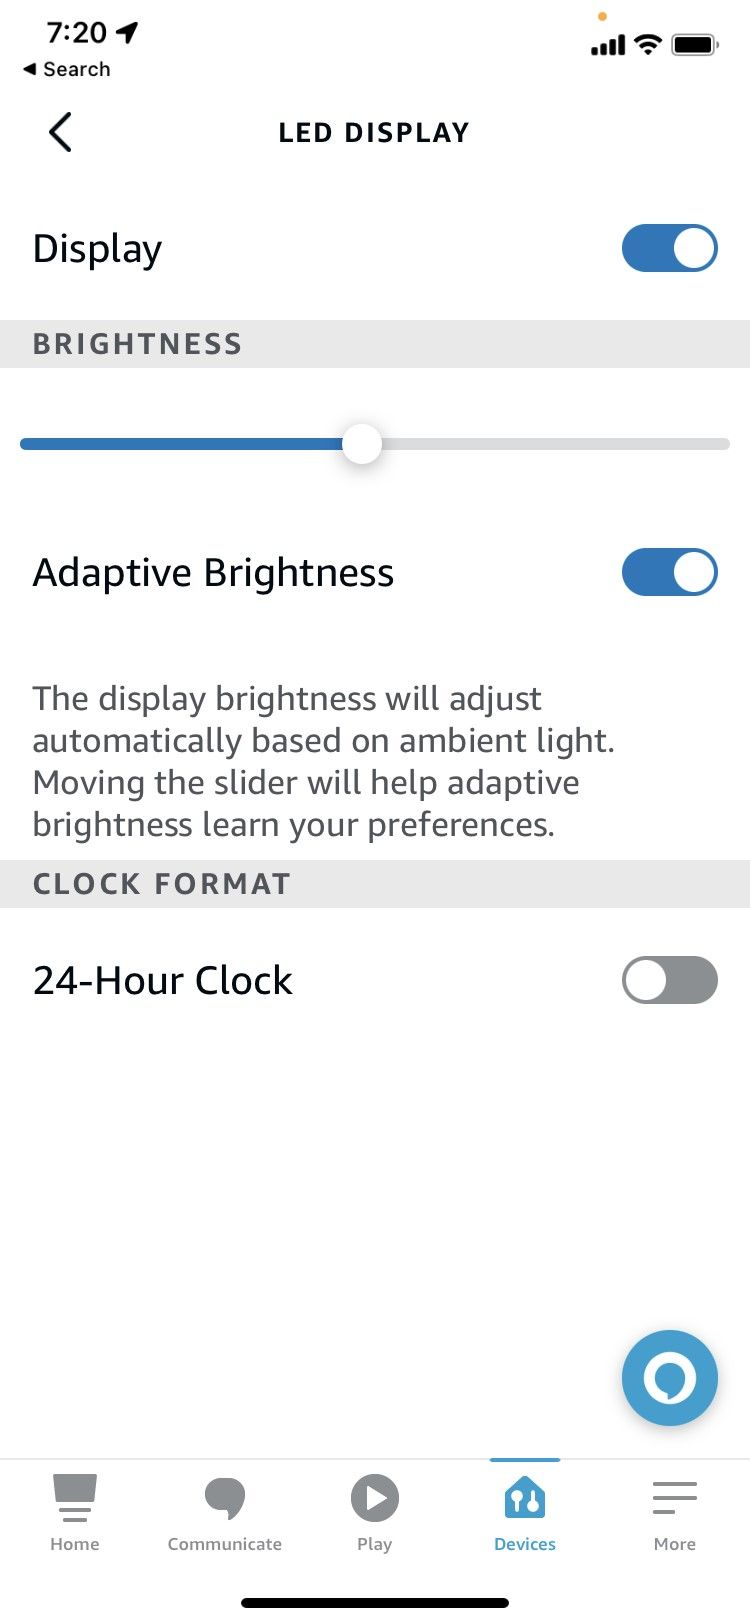 LED Display options in the Alexa app